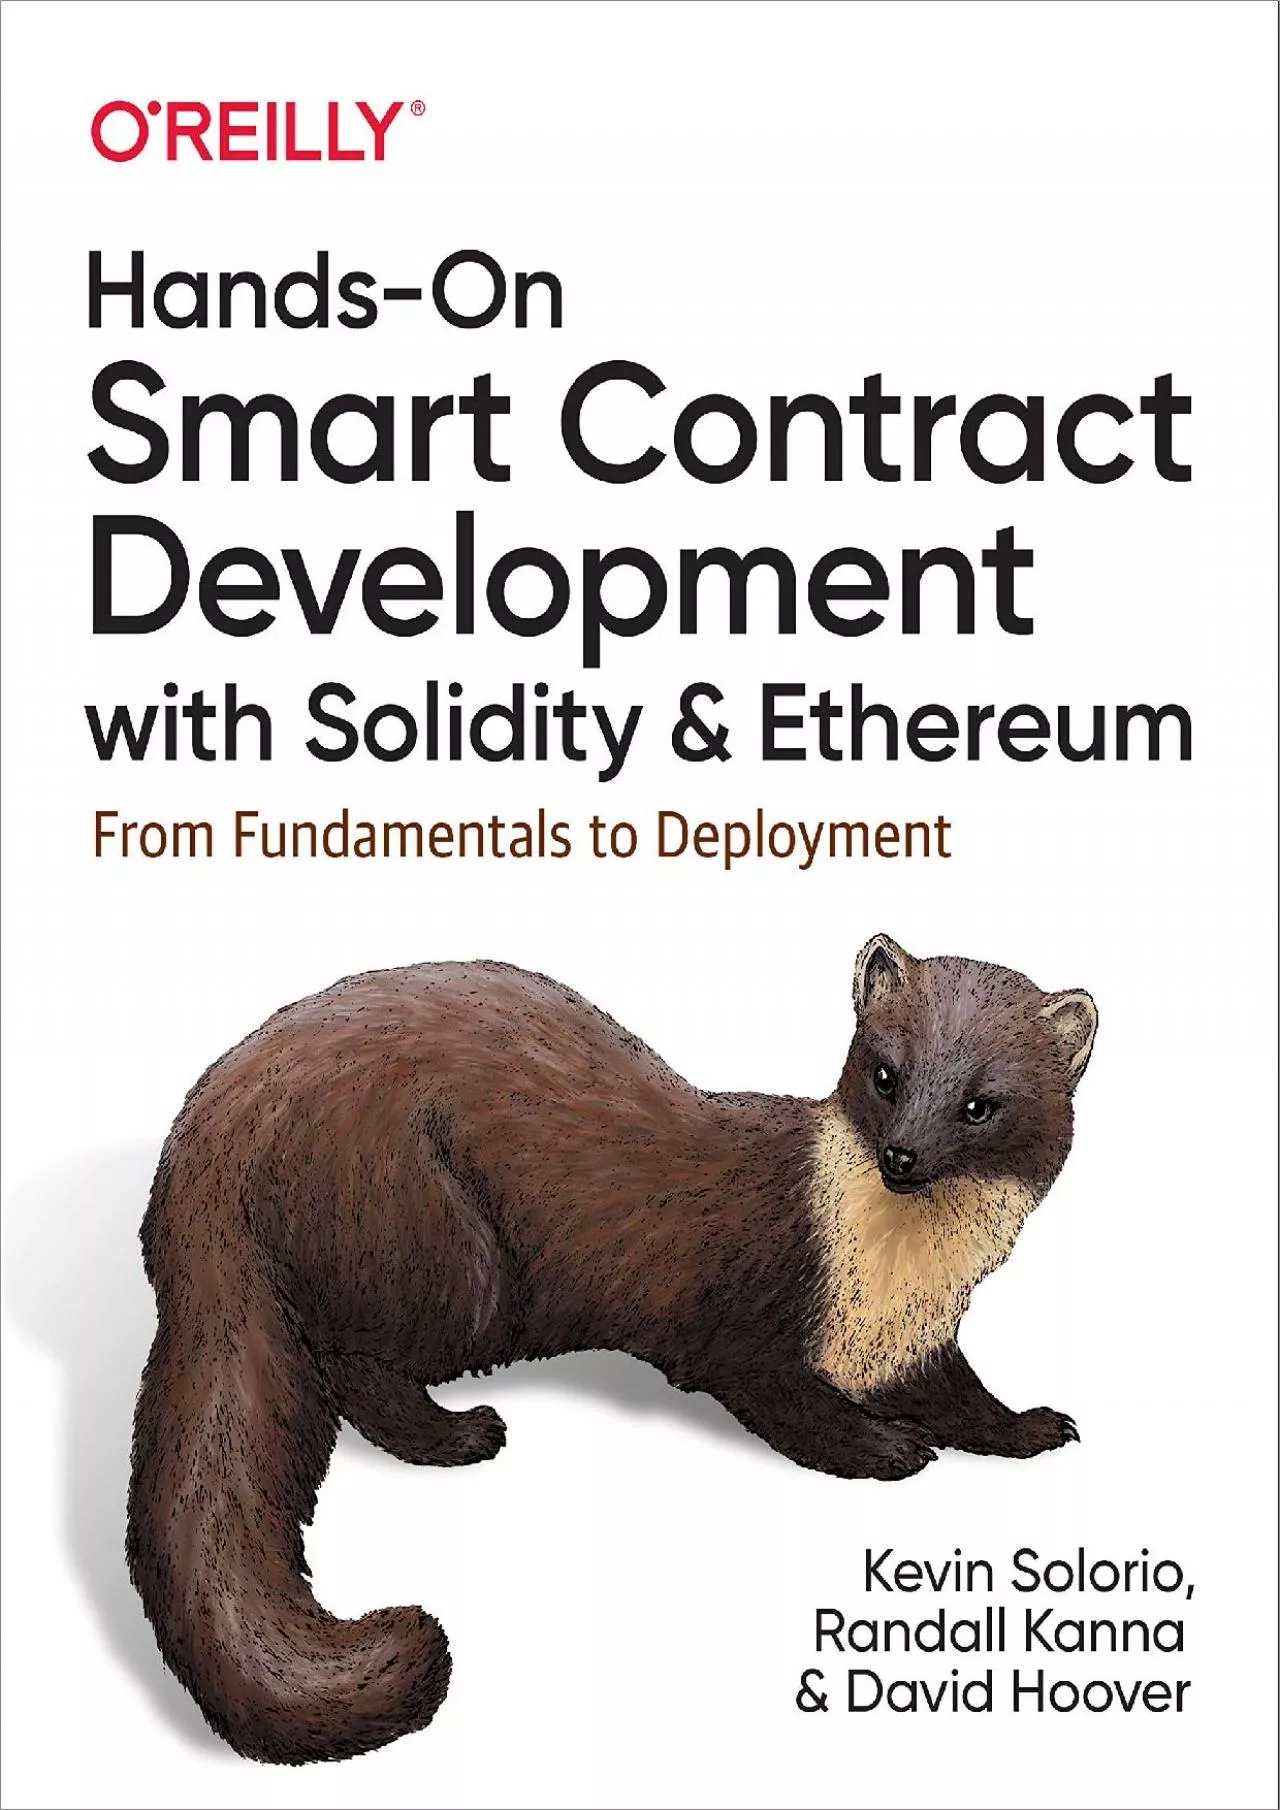 (DOWNLOAD)-Hands-On Smart Contract Development with Solidity and Ethereum: From Fundamentals